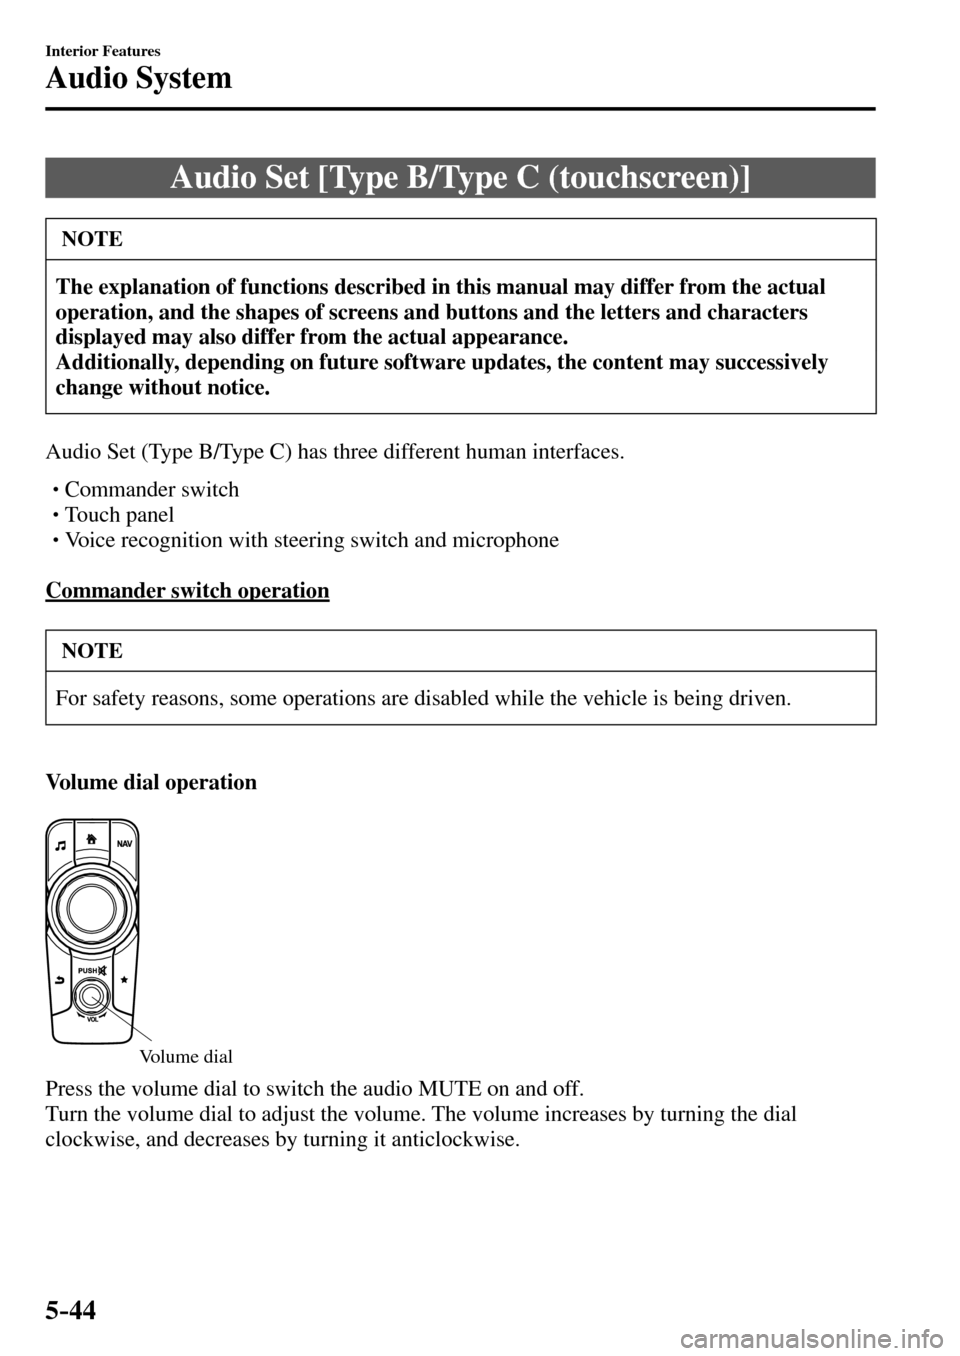 MAZDA MODEL MX-5 RF 2017  Owners Manual (in English) 5–44
Interior Features
Audio System
 Audio Set [Type B/Type C (touchscreen)]
 NOTE
The explanation of functions described in this manual may differ from the actual 
operation, and the shapes of scre